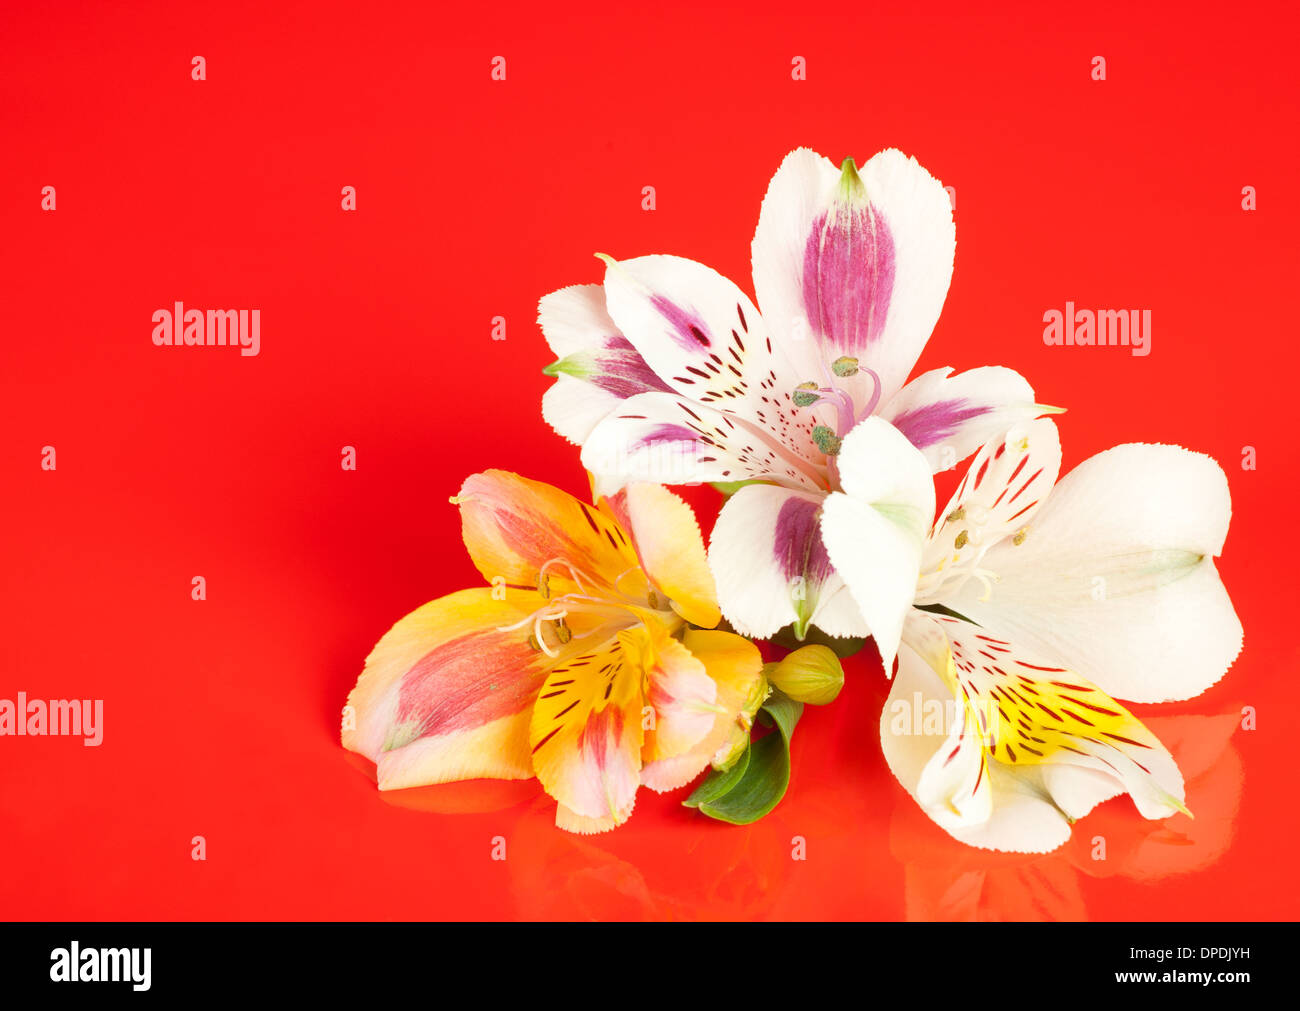 Alstroemeria flowers laid out on a glossy red background Stock Photo